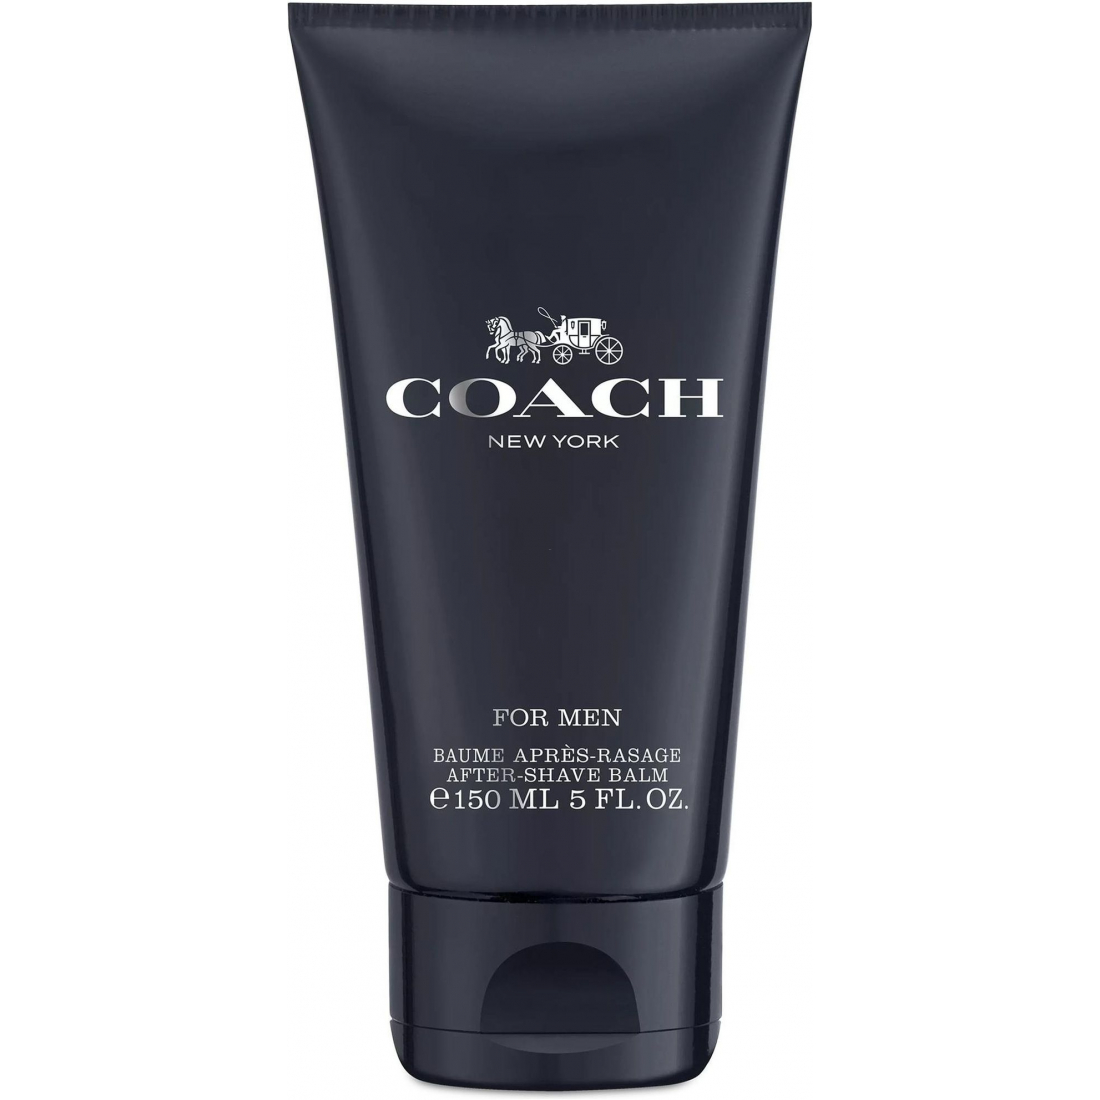 'Coach New York' After-Shave-Balsam - 150 ml